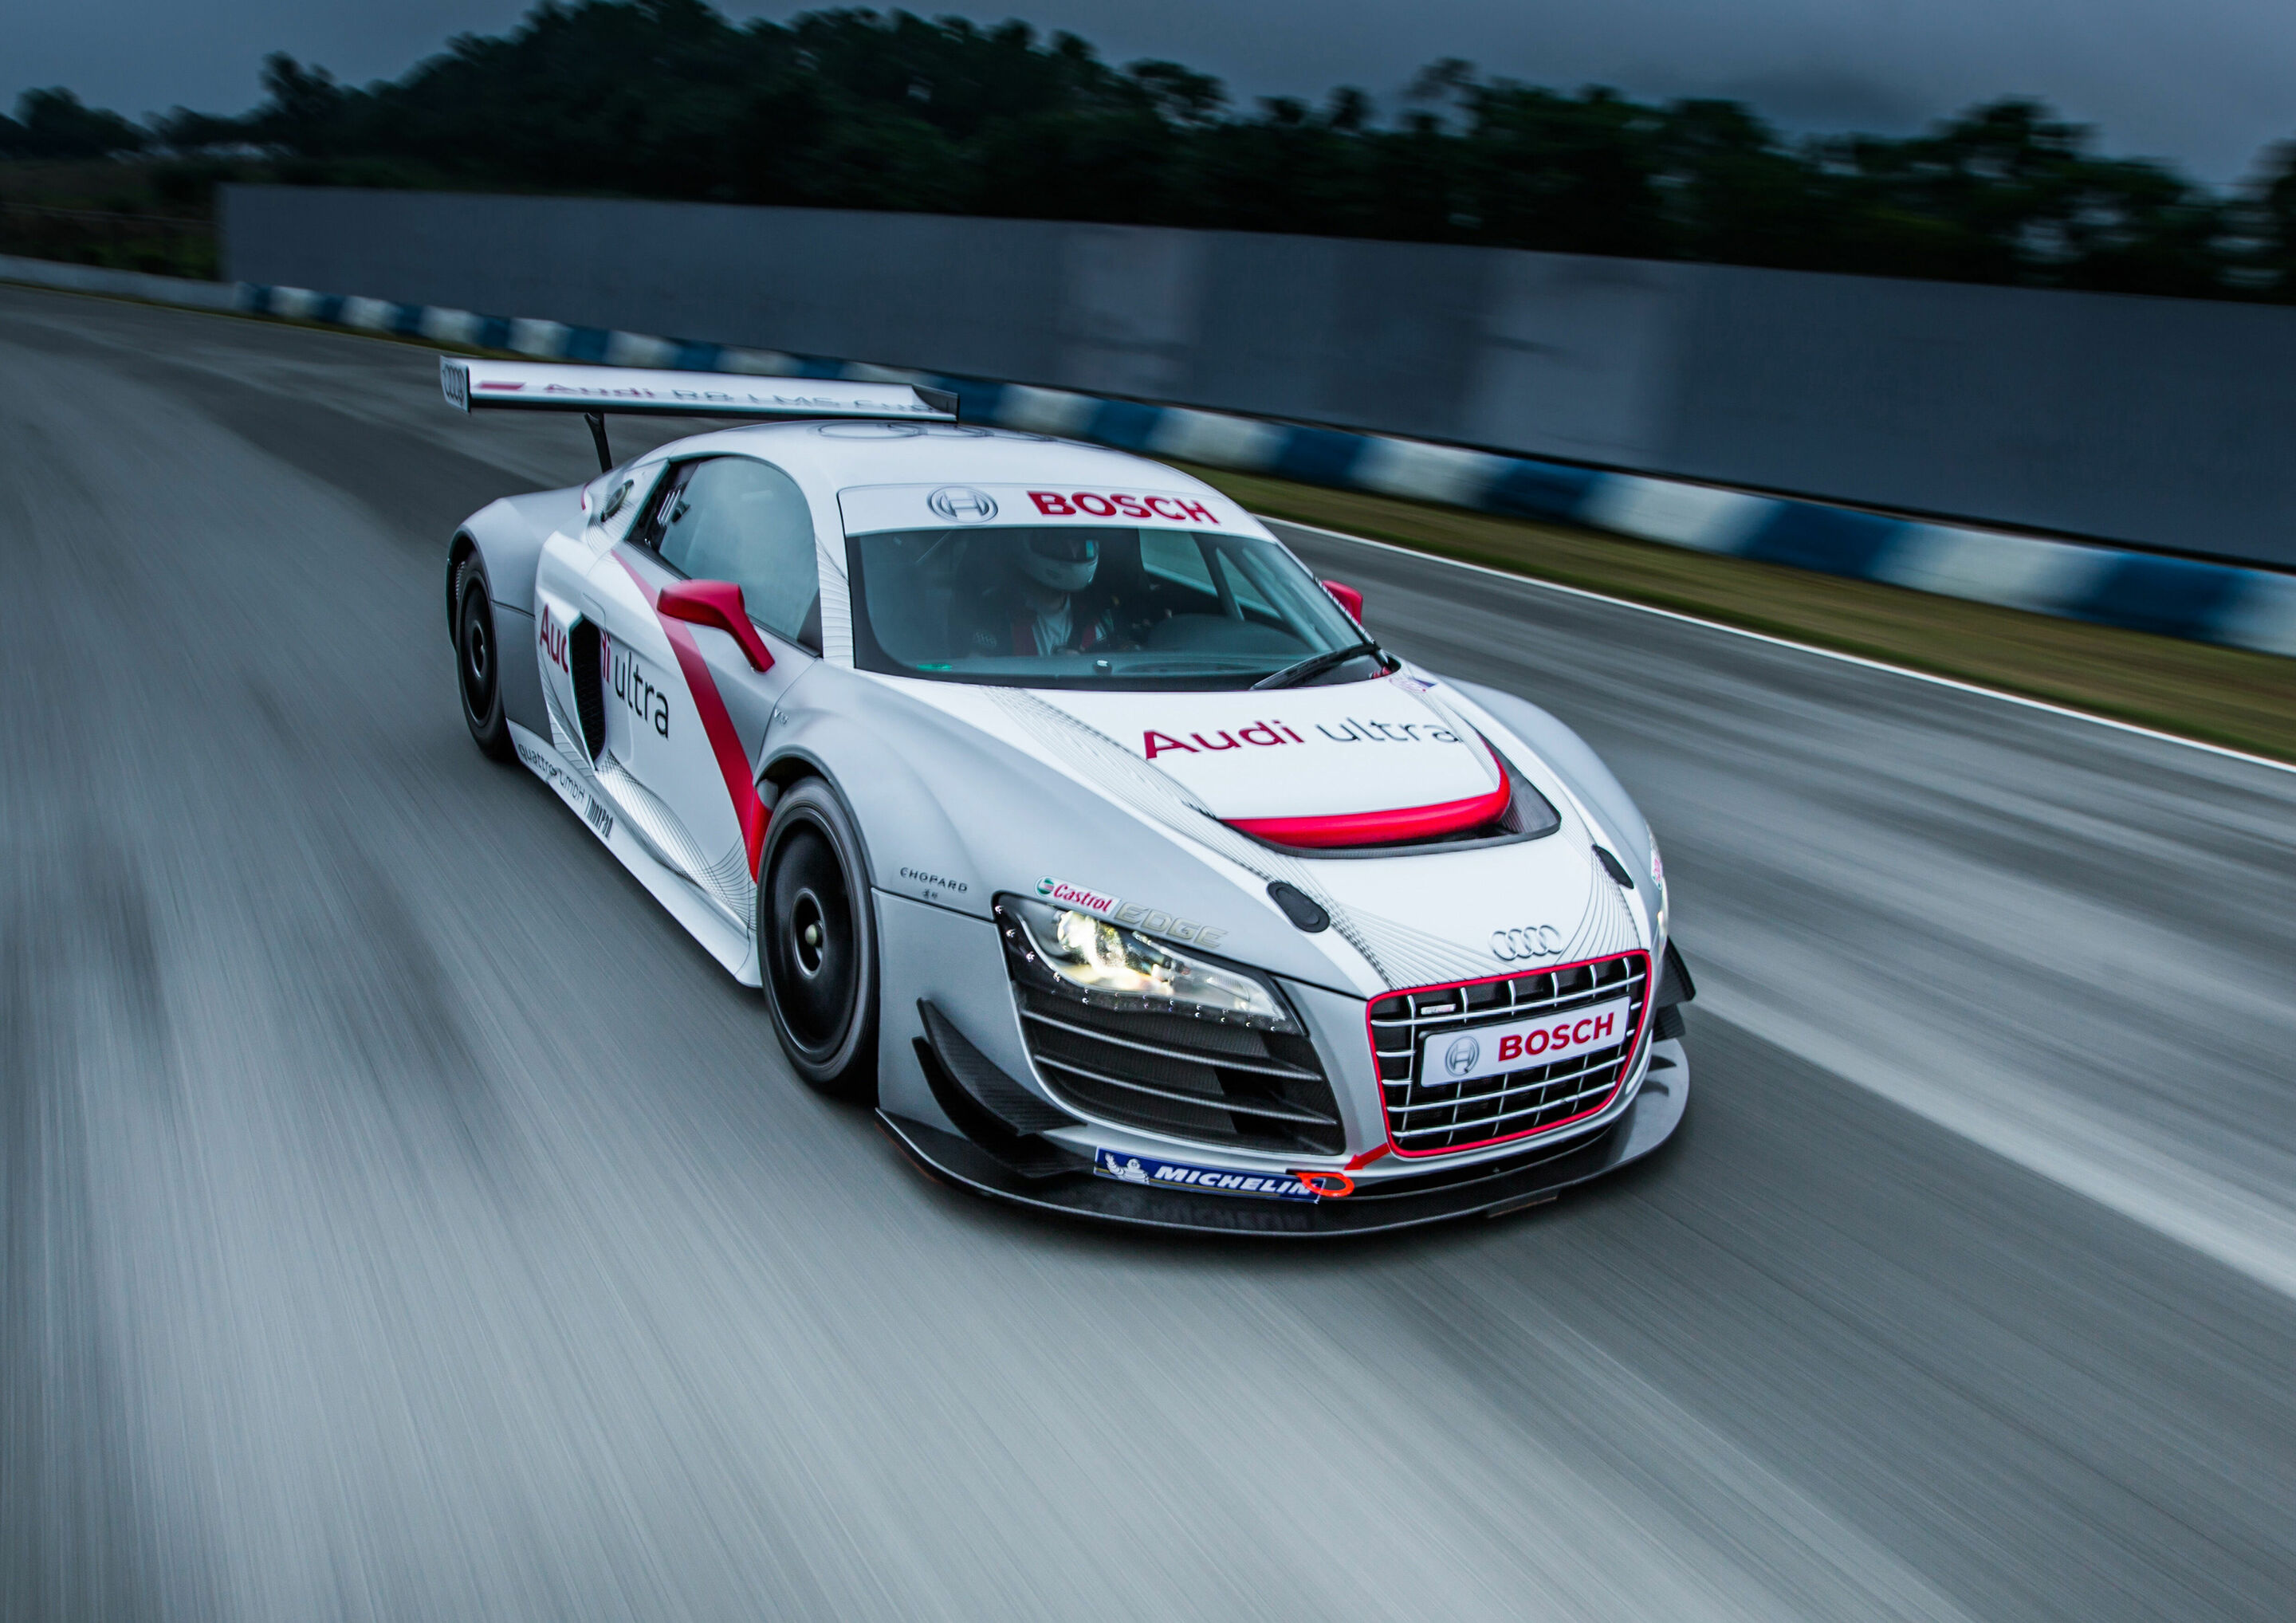 Audi expands with GT3 race series in Asia